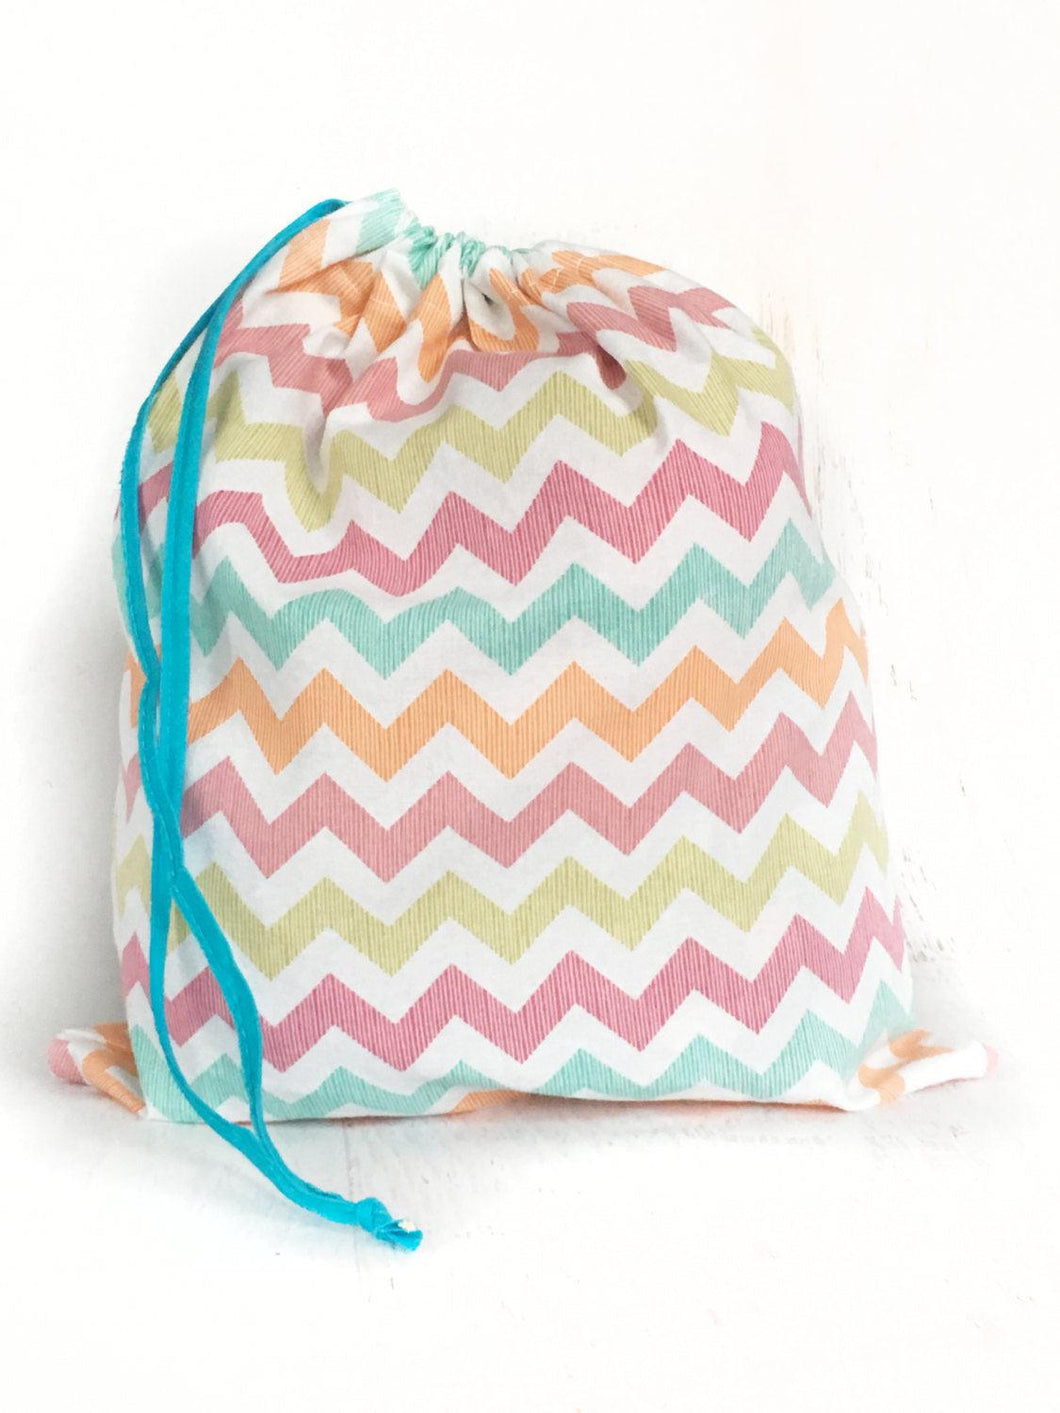 Colorful cotton chevron drawstring project bag for knitting and crochet